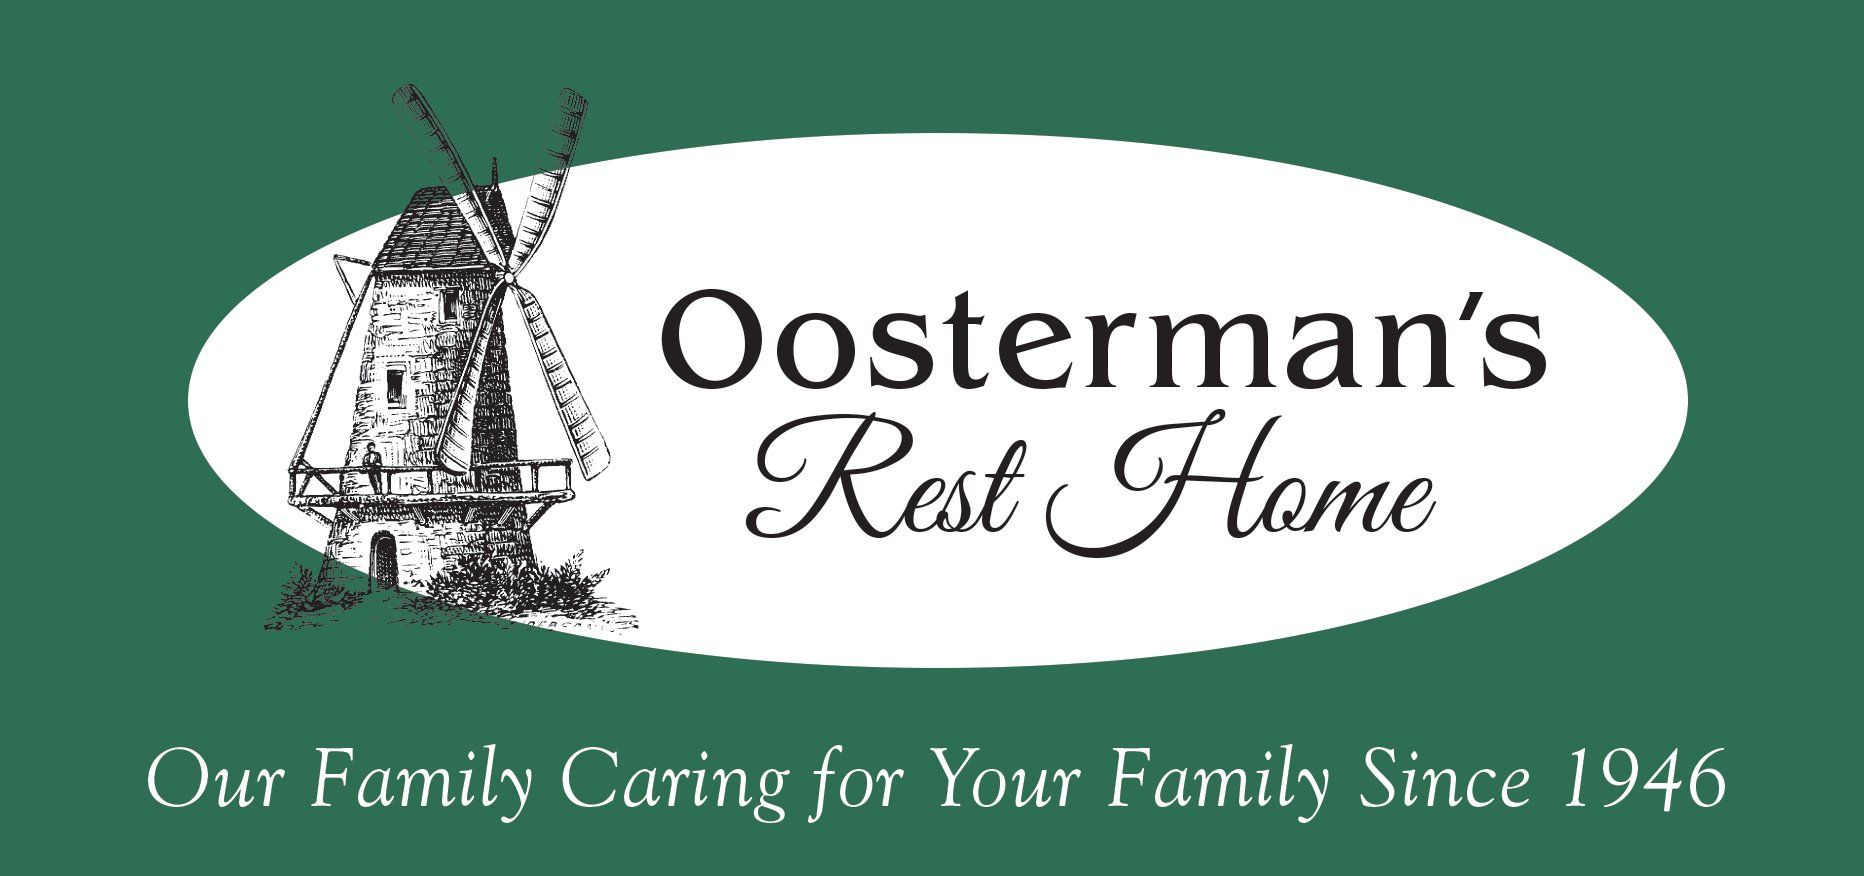 Oosterman's Rest Home